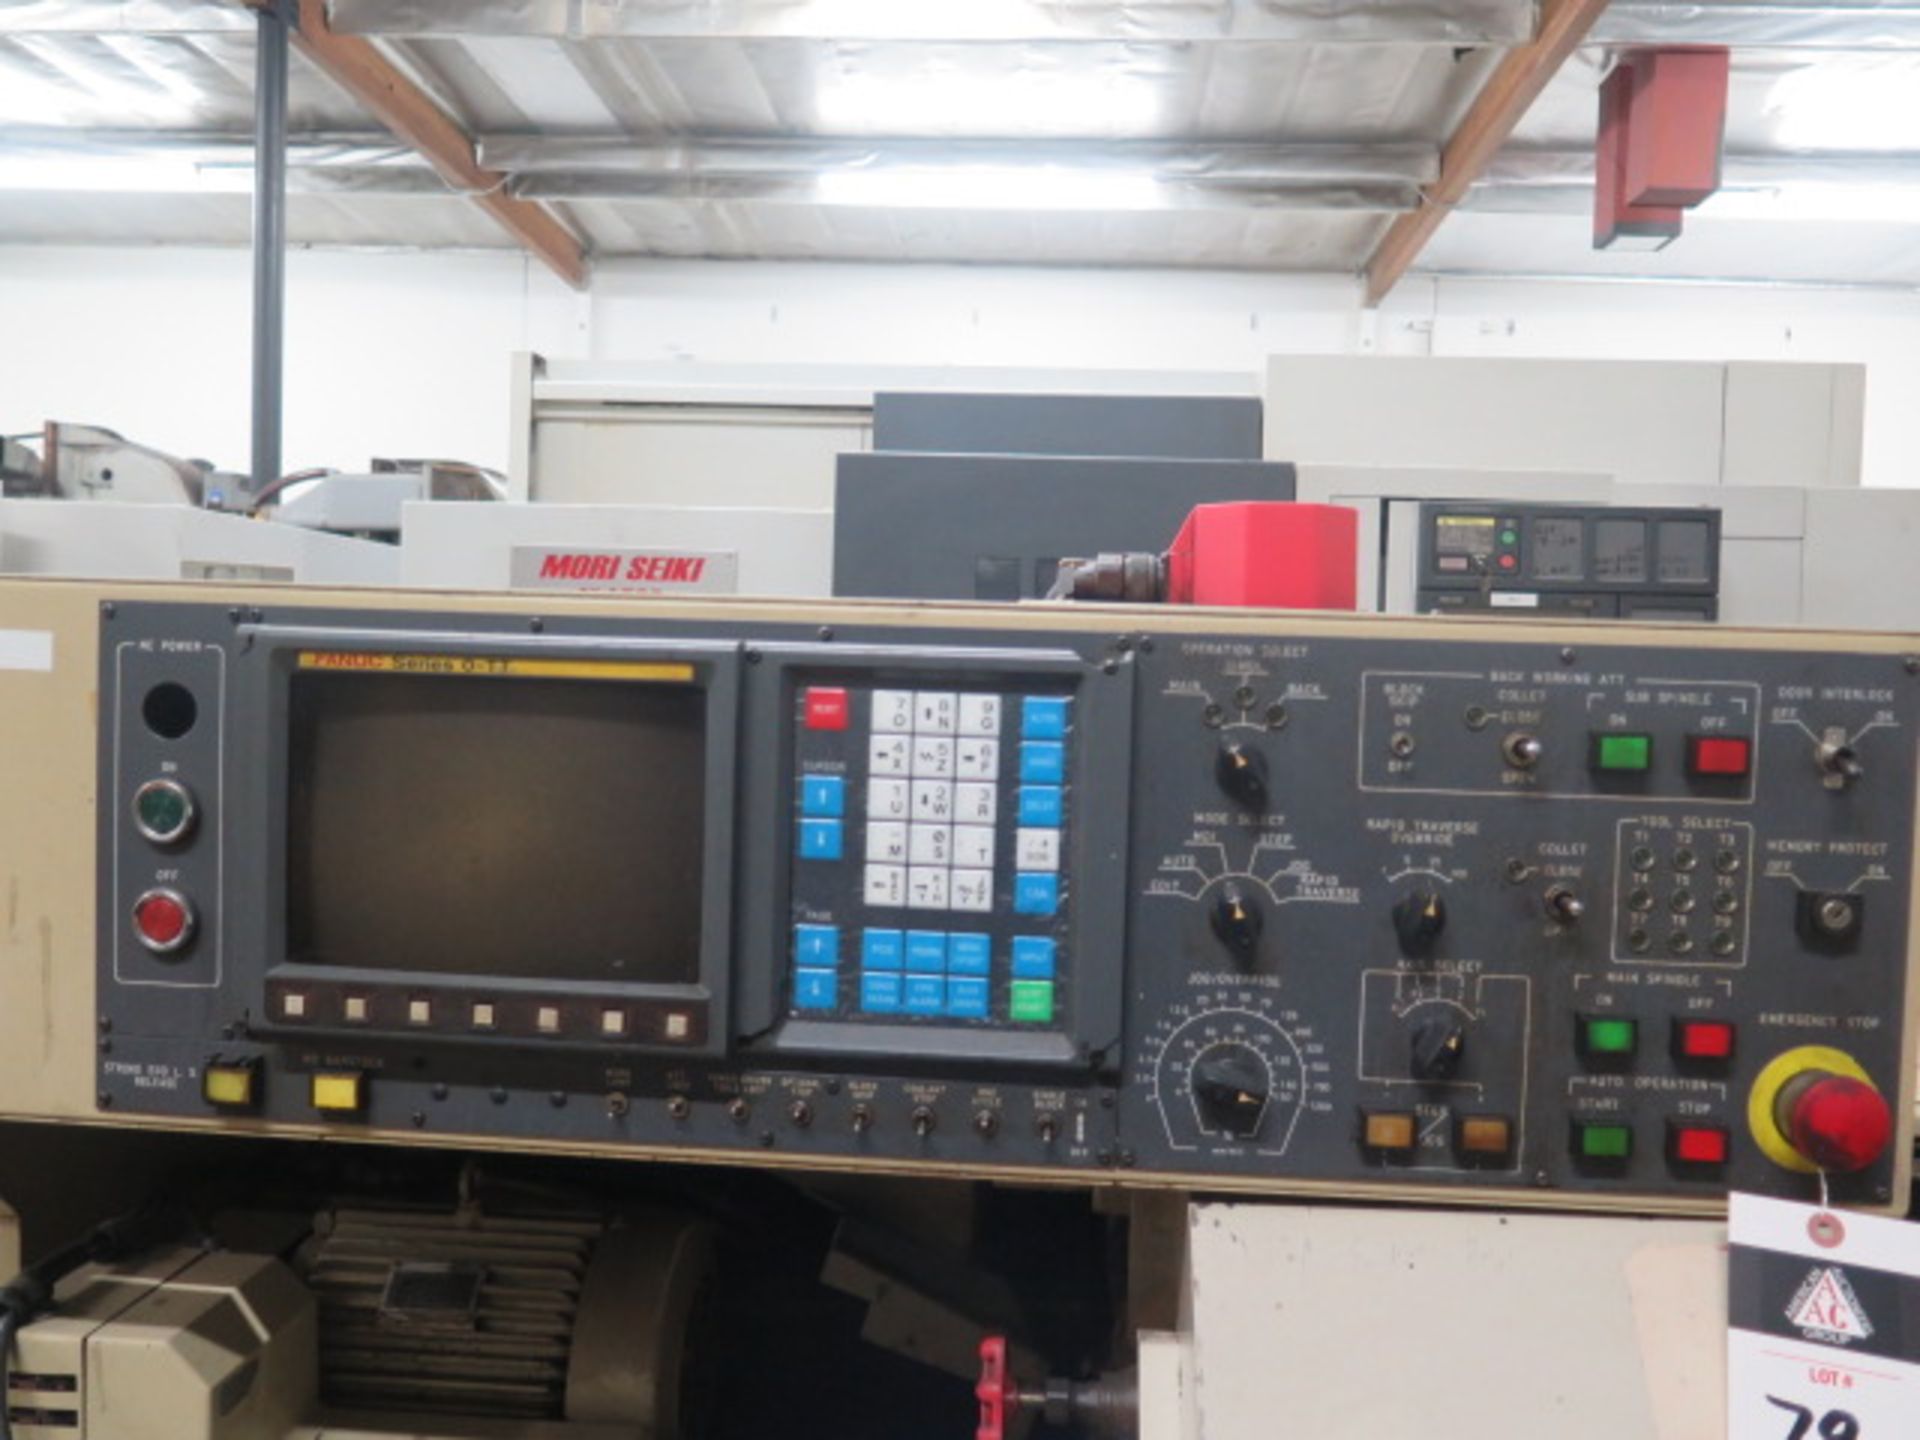 Star SST-16 CNC Screw Machine s/n 010362 w/ Fanuc Series 0-TT Controls, Sub Spindle, SOLD AS IS - Image 8 of 19